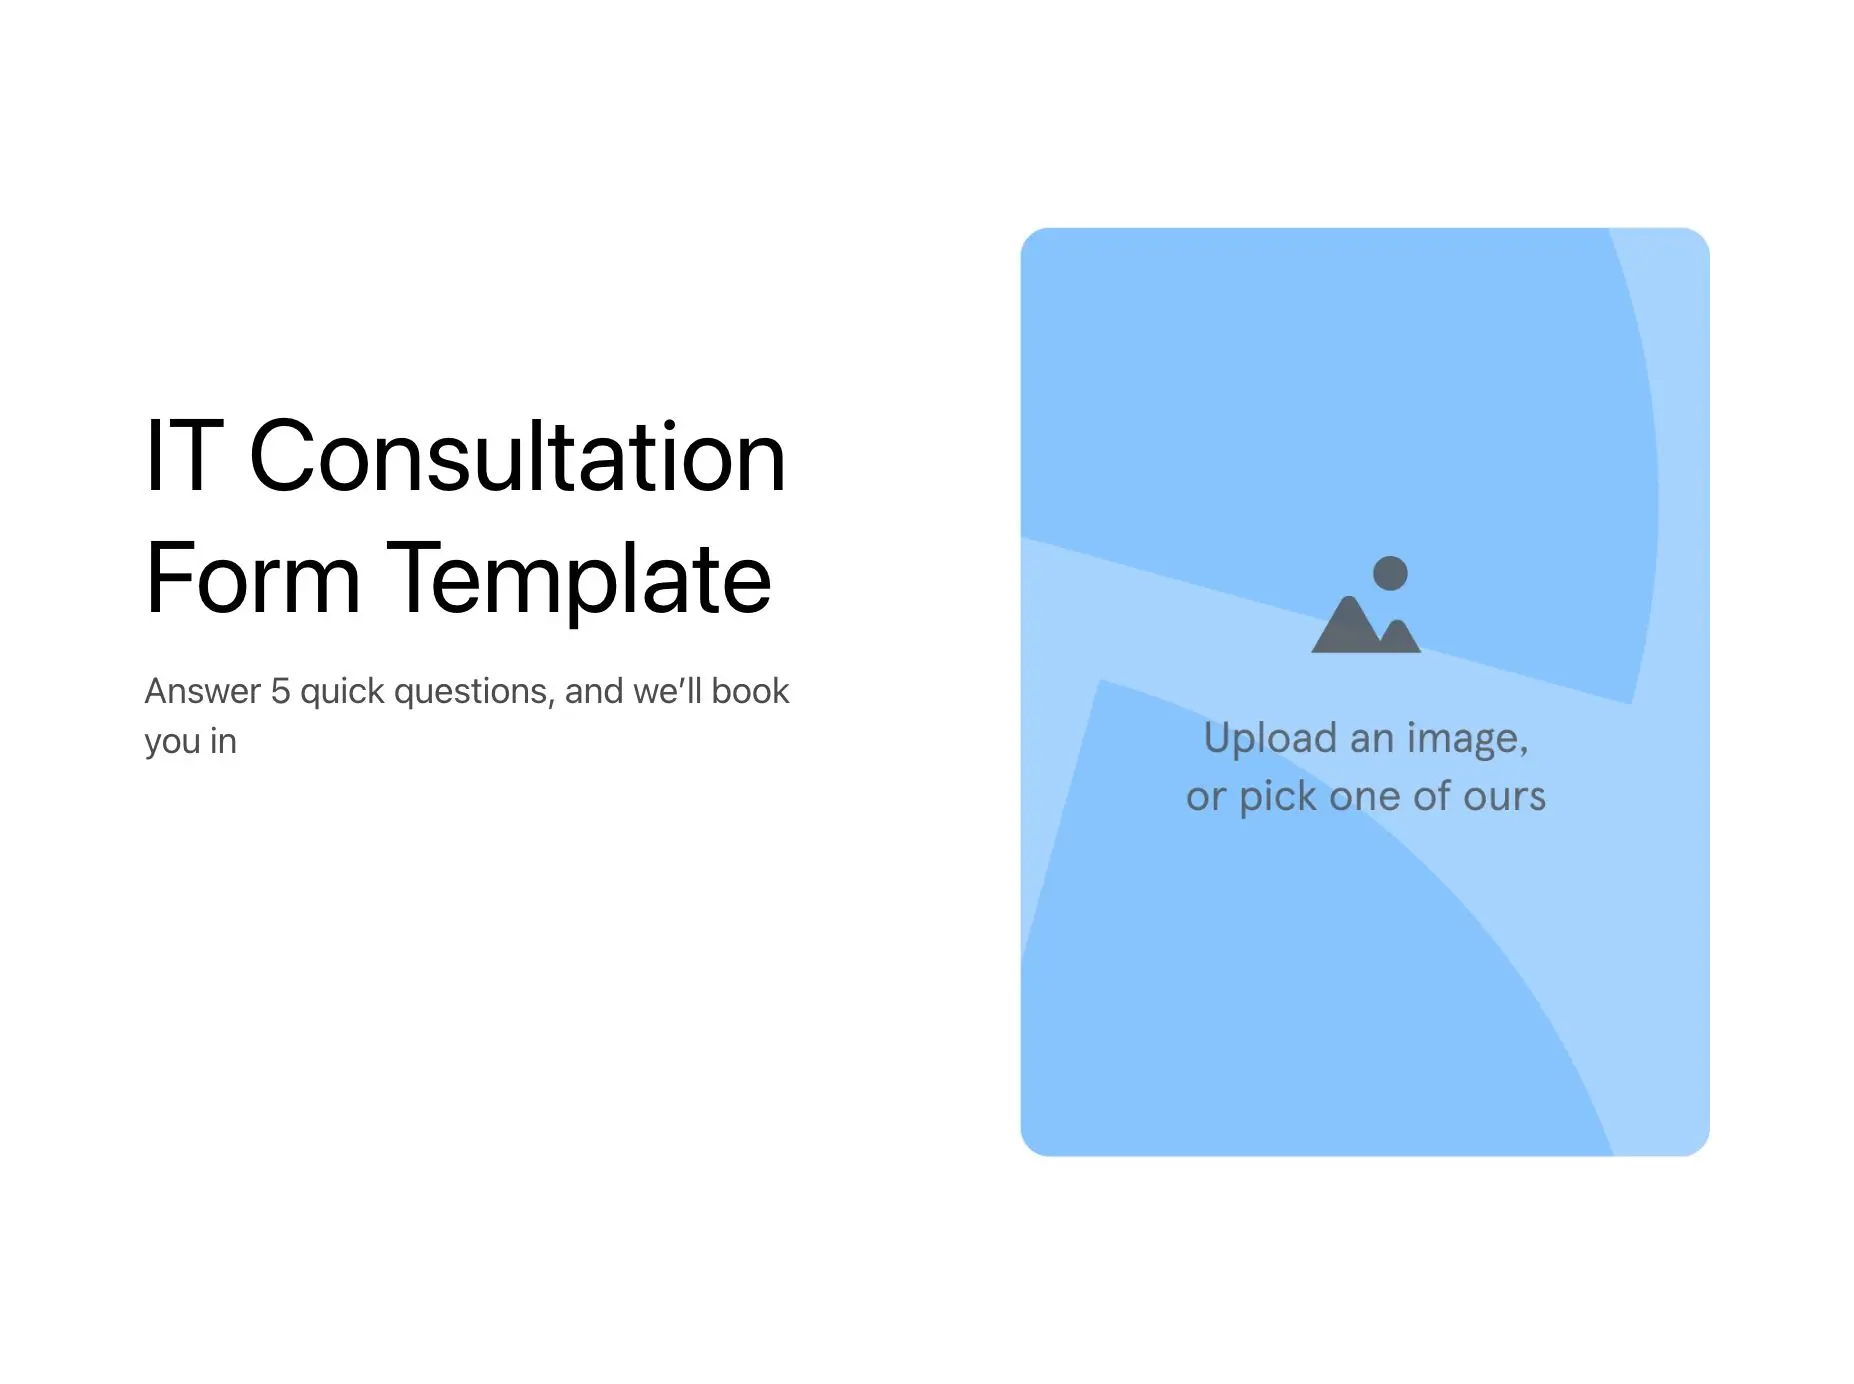 IT Consultation Form Template Hero